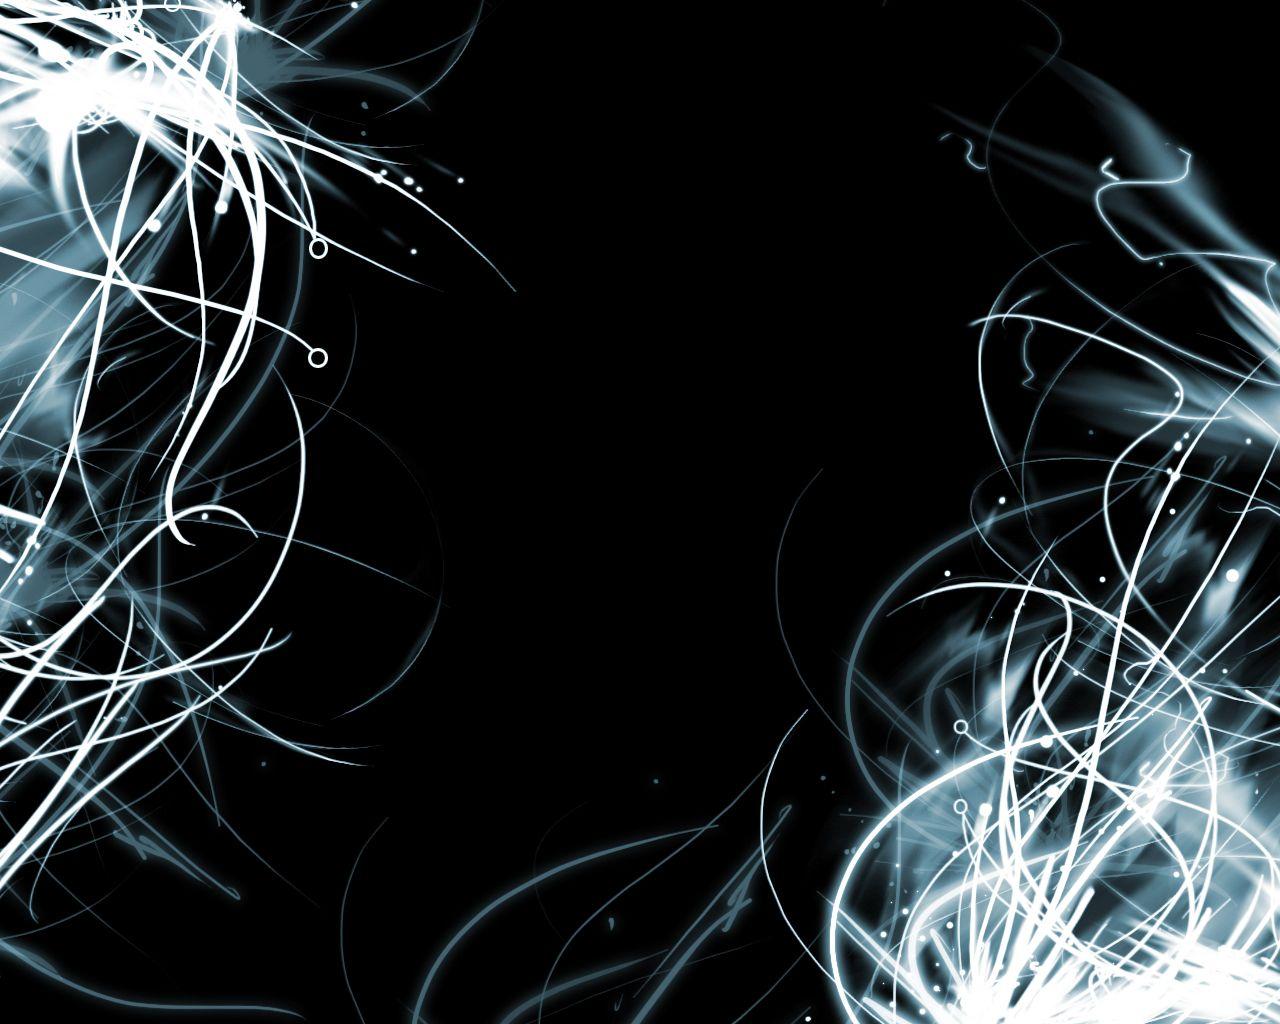 The Nices Wallpaper: Abstract Wallpaper Black